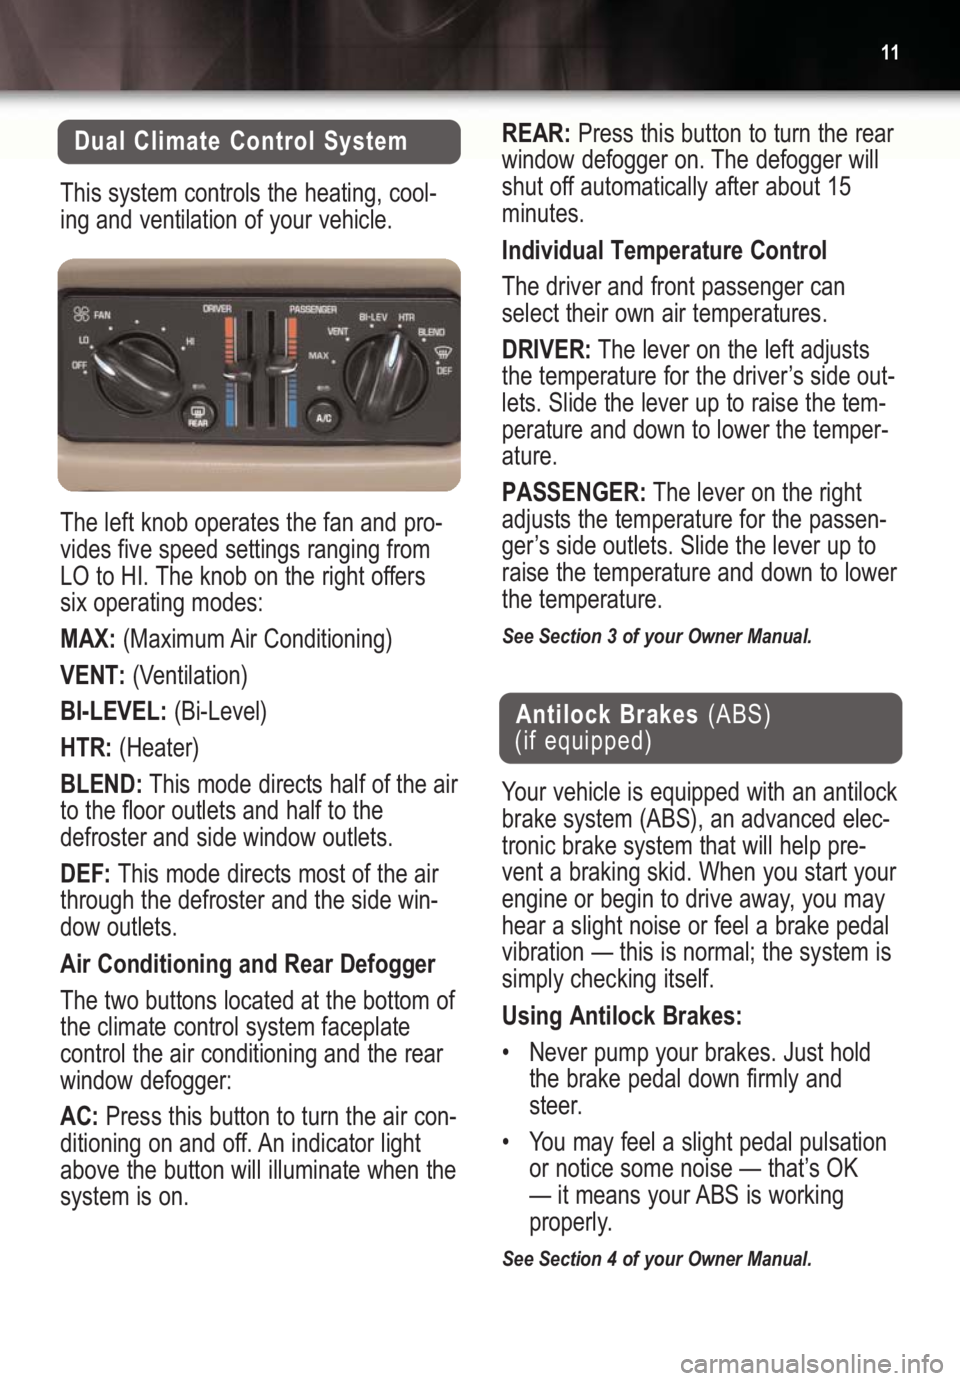 BUICK CENTURY 2004  Get To Know Guide 11
Dual Climate Control System
This system controls the heating, cool-
ing and ventilation of your vehicle.
The left knob operates the fan and pro-
vides five speed settings ranging from
LO to HI. The